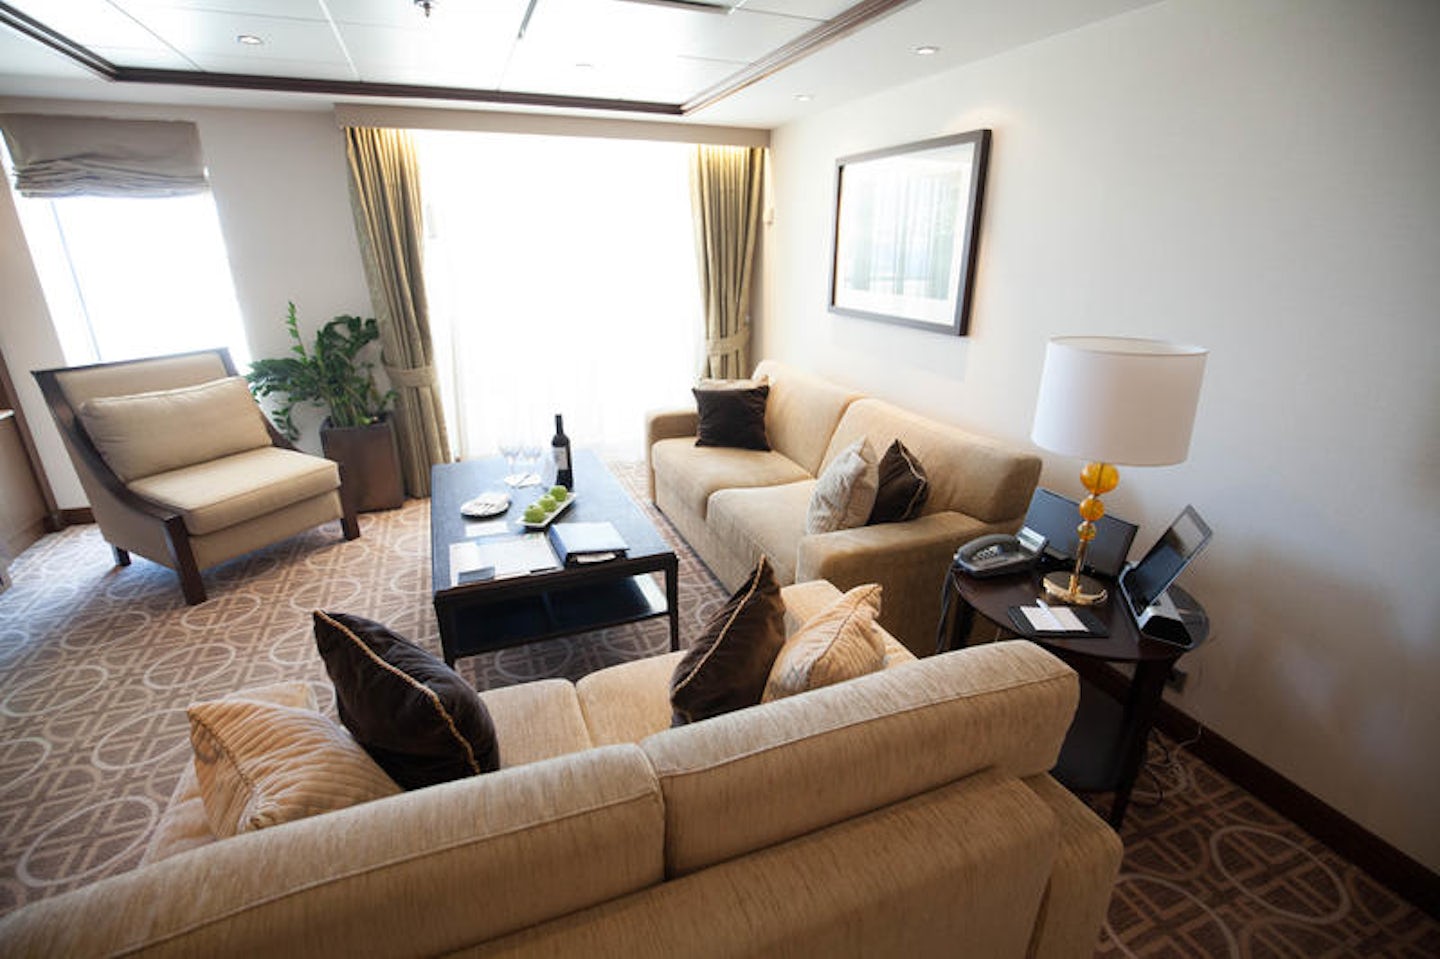 The Royal Suite on Celebrity Reflection